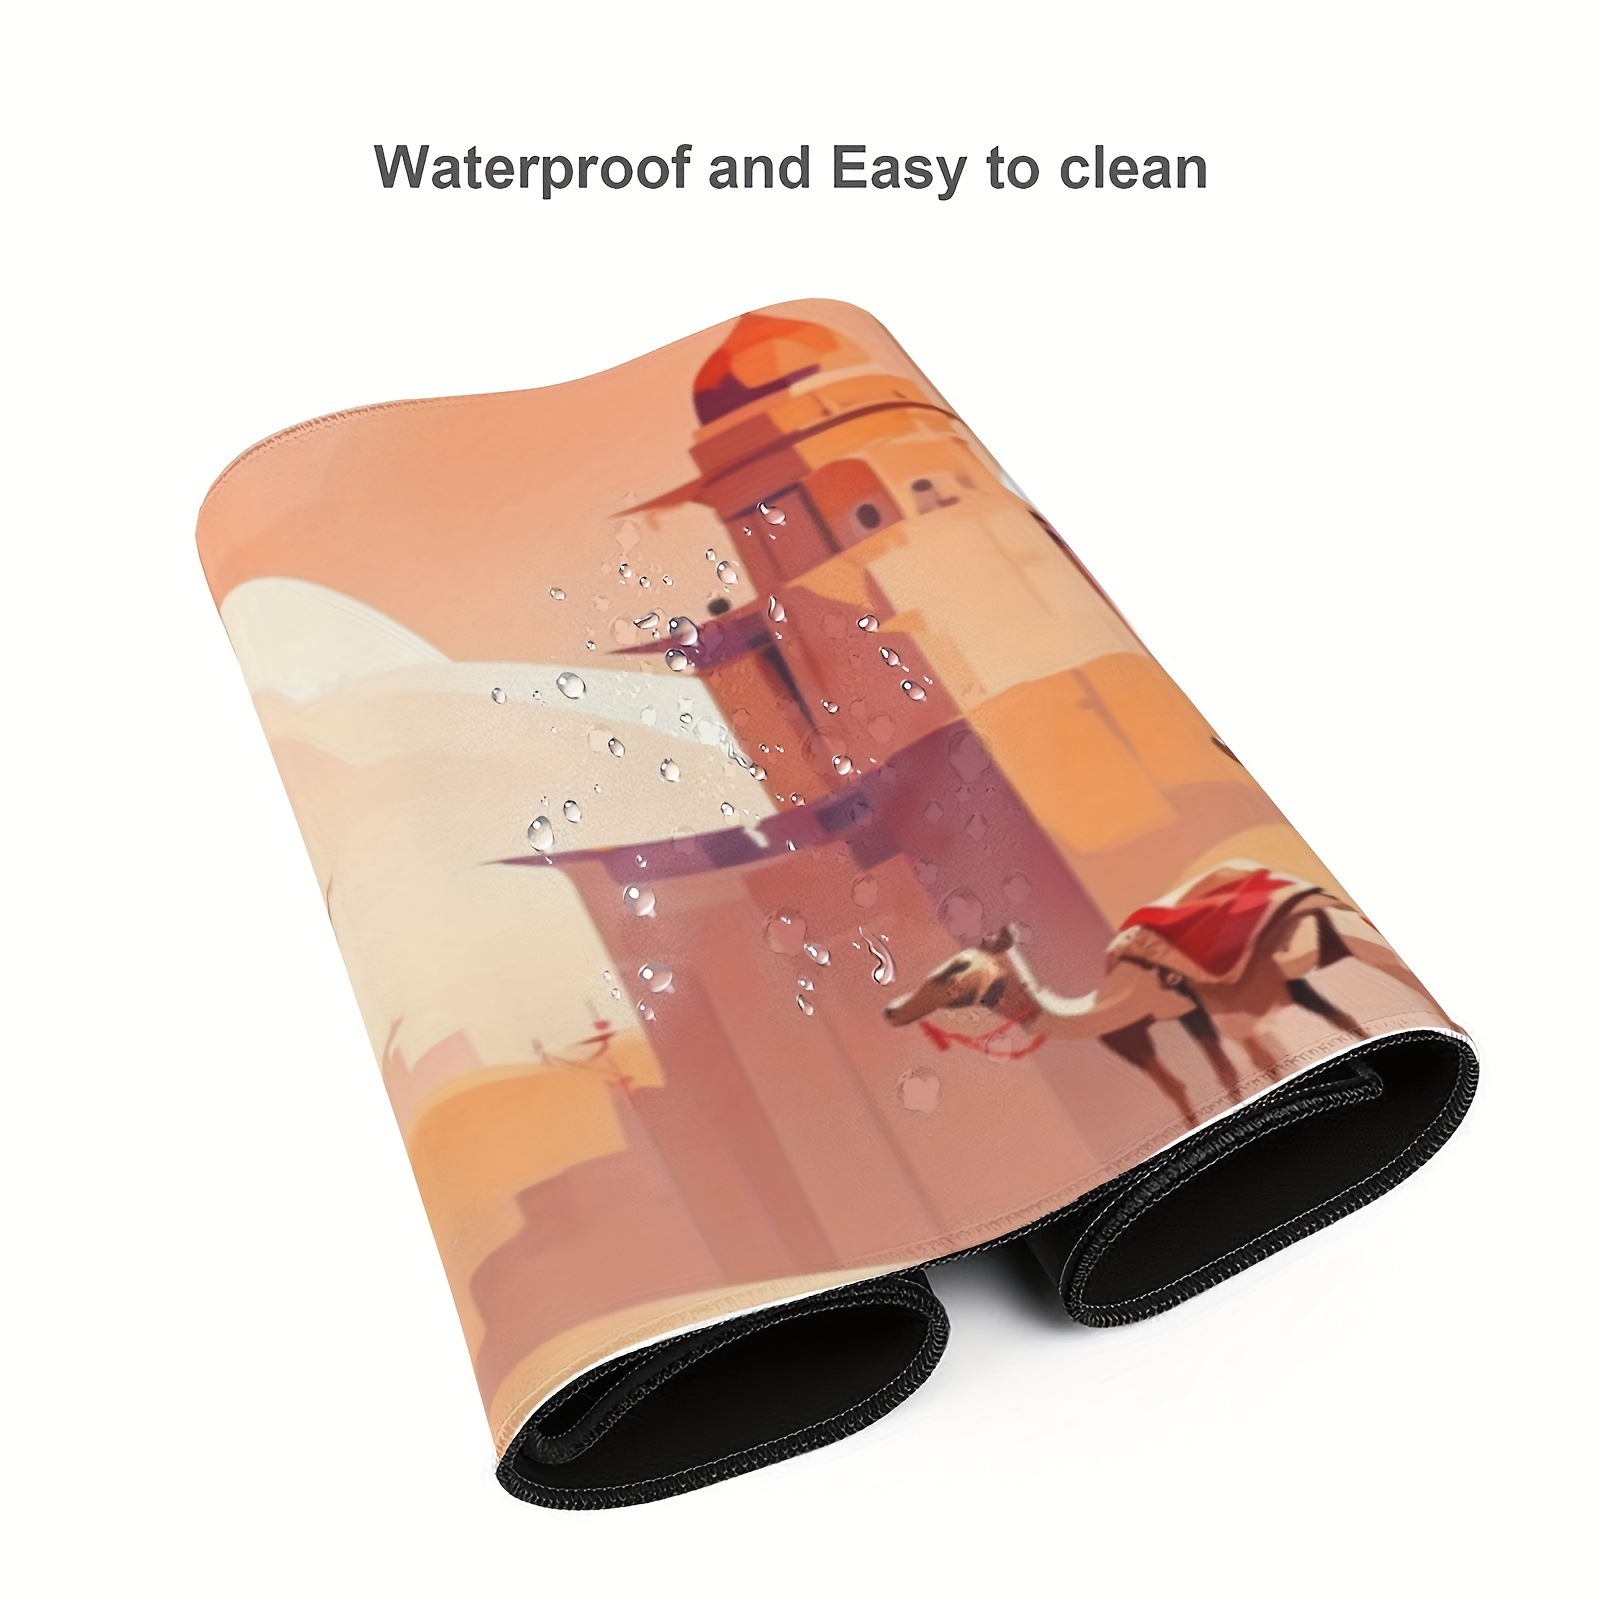 Waterfall Desk Accessories With Gel Wrist Support Soft Material